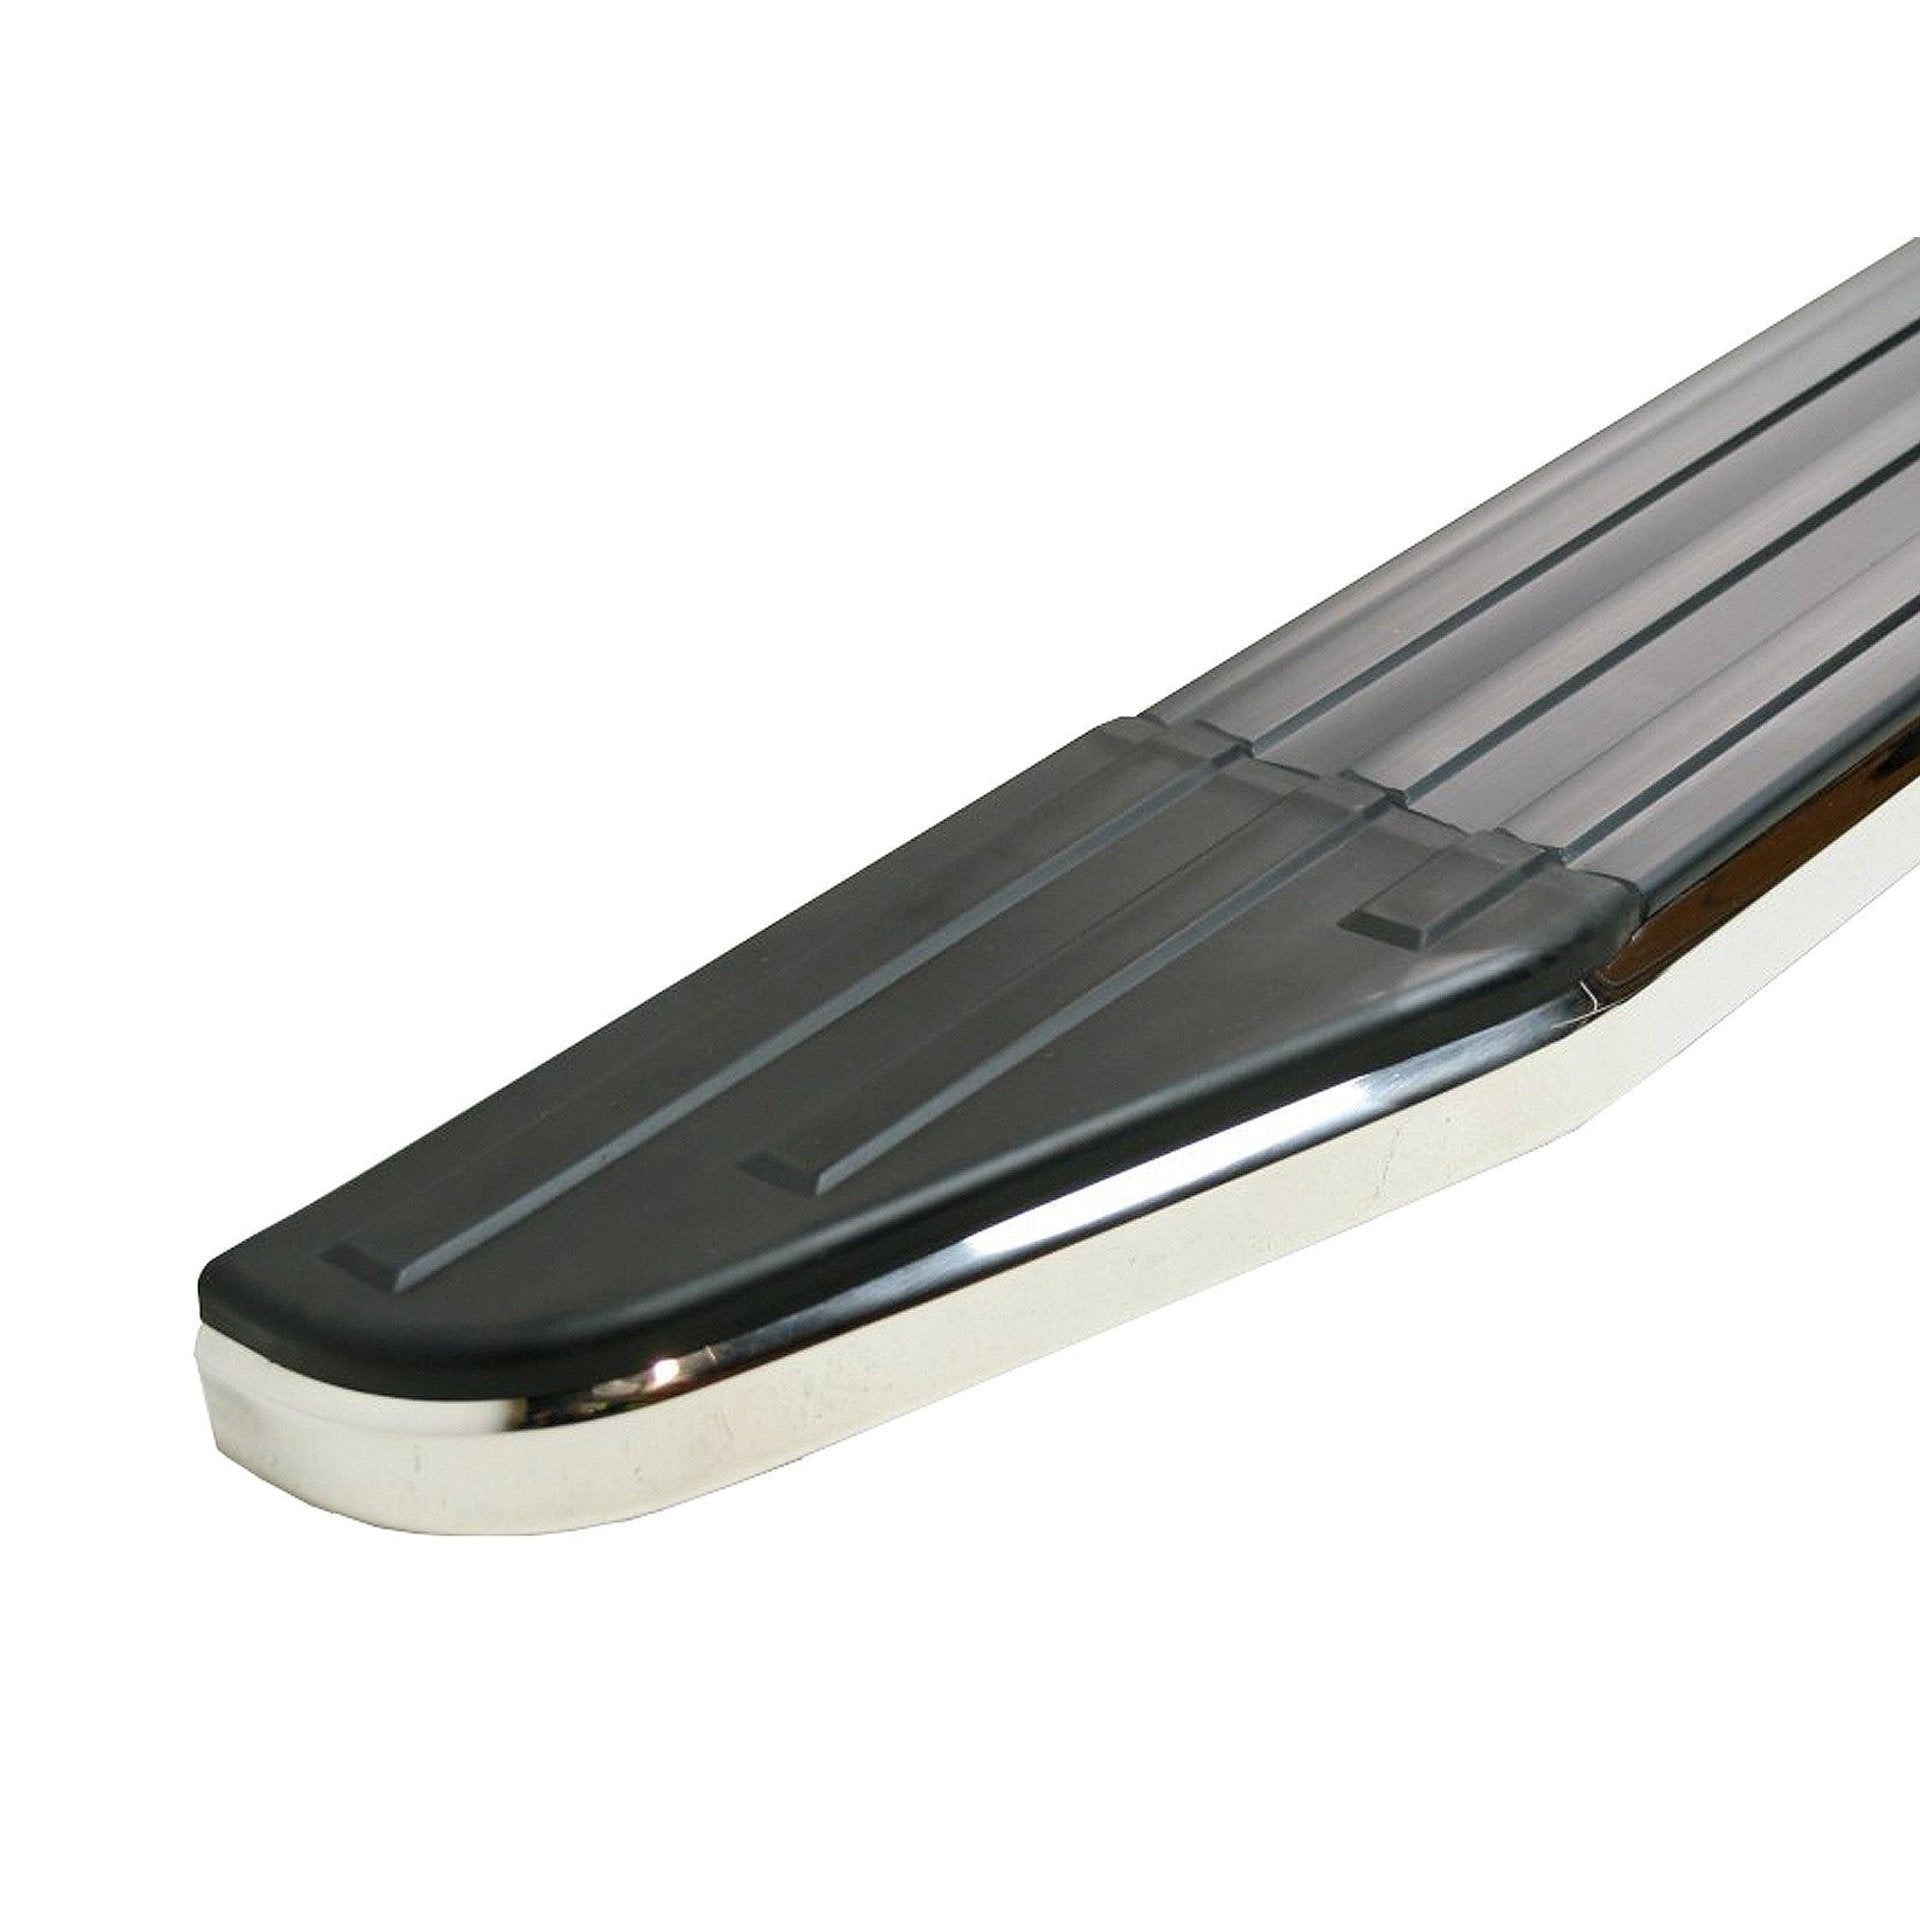 Raptor Side Steps Running Boards for Lexus RX 200t -  - sold by Direct4x4